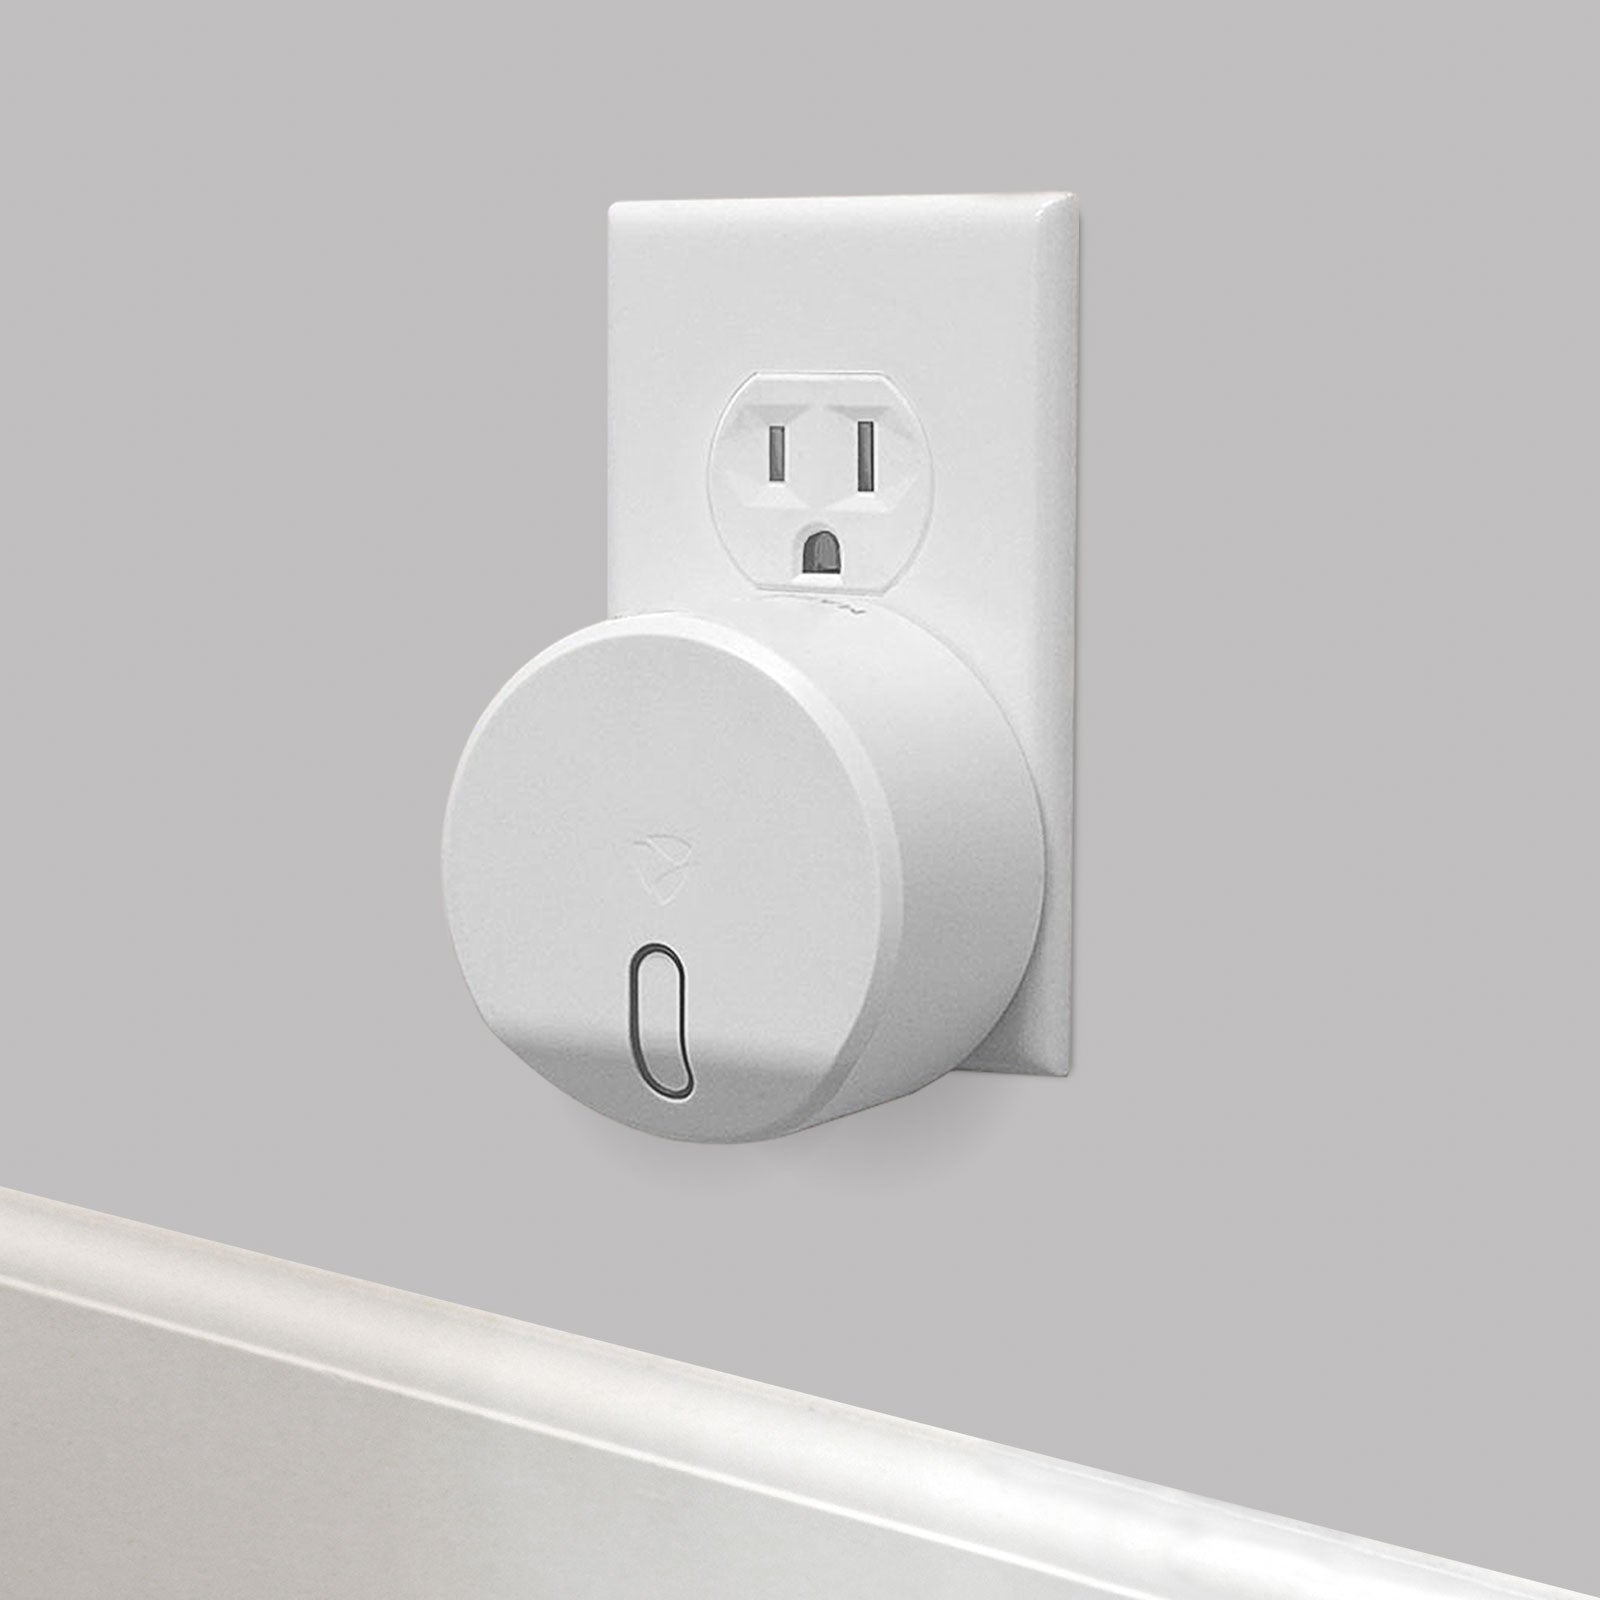 A SECURAM Smart Hub with a light switch on it.